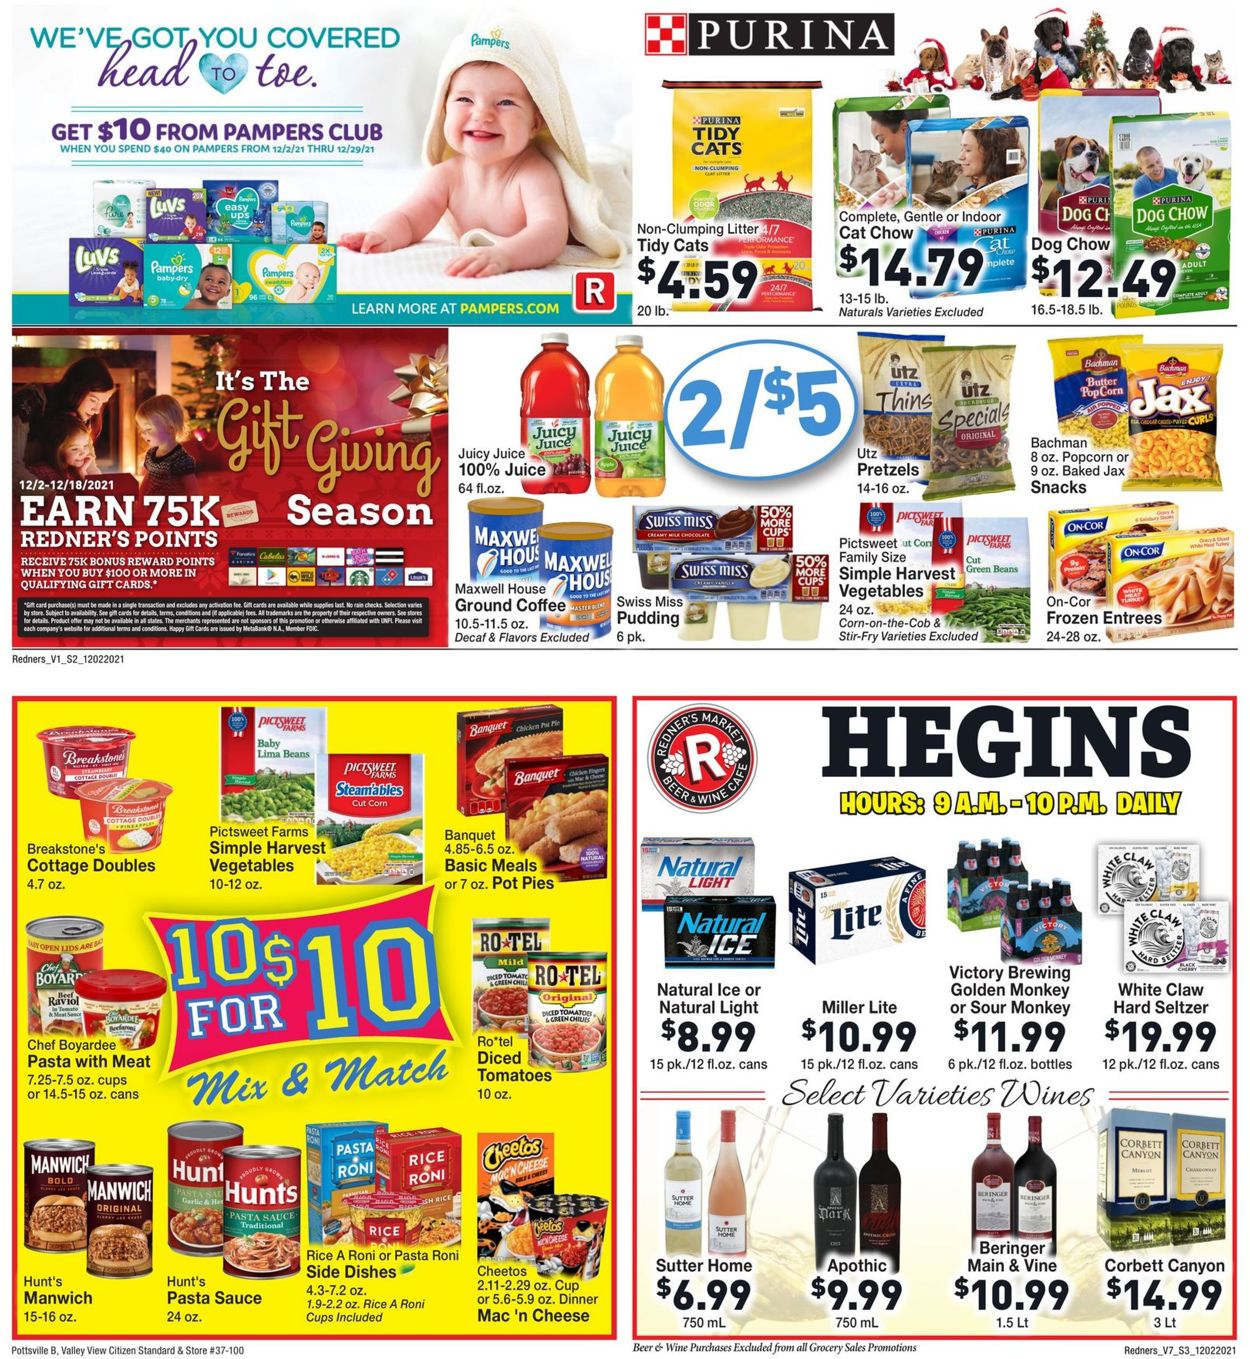 Catalogue Redner’s Warehouse Market from 12/02/2021